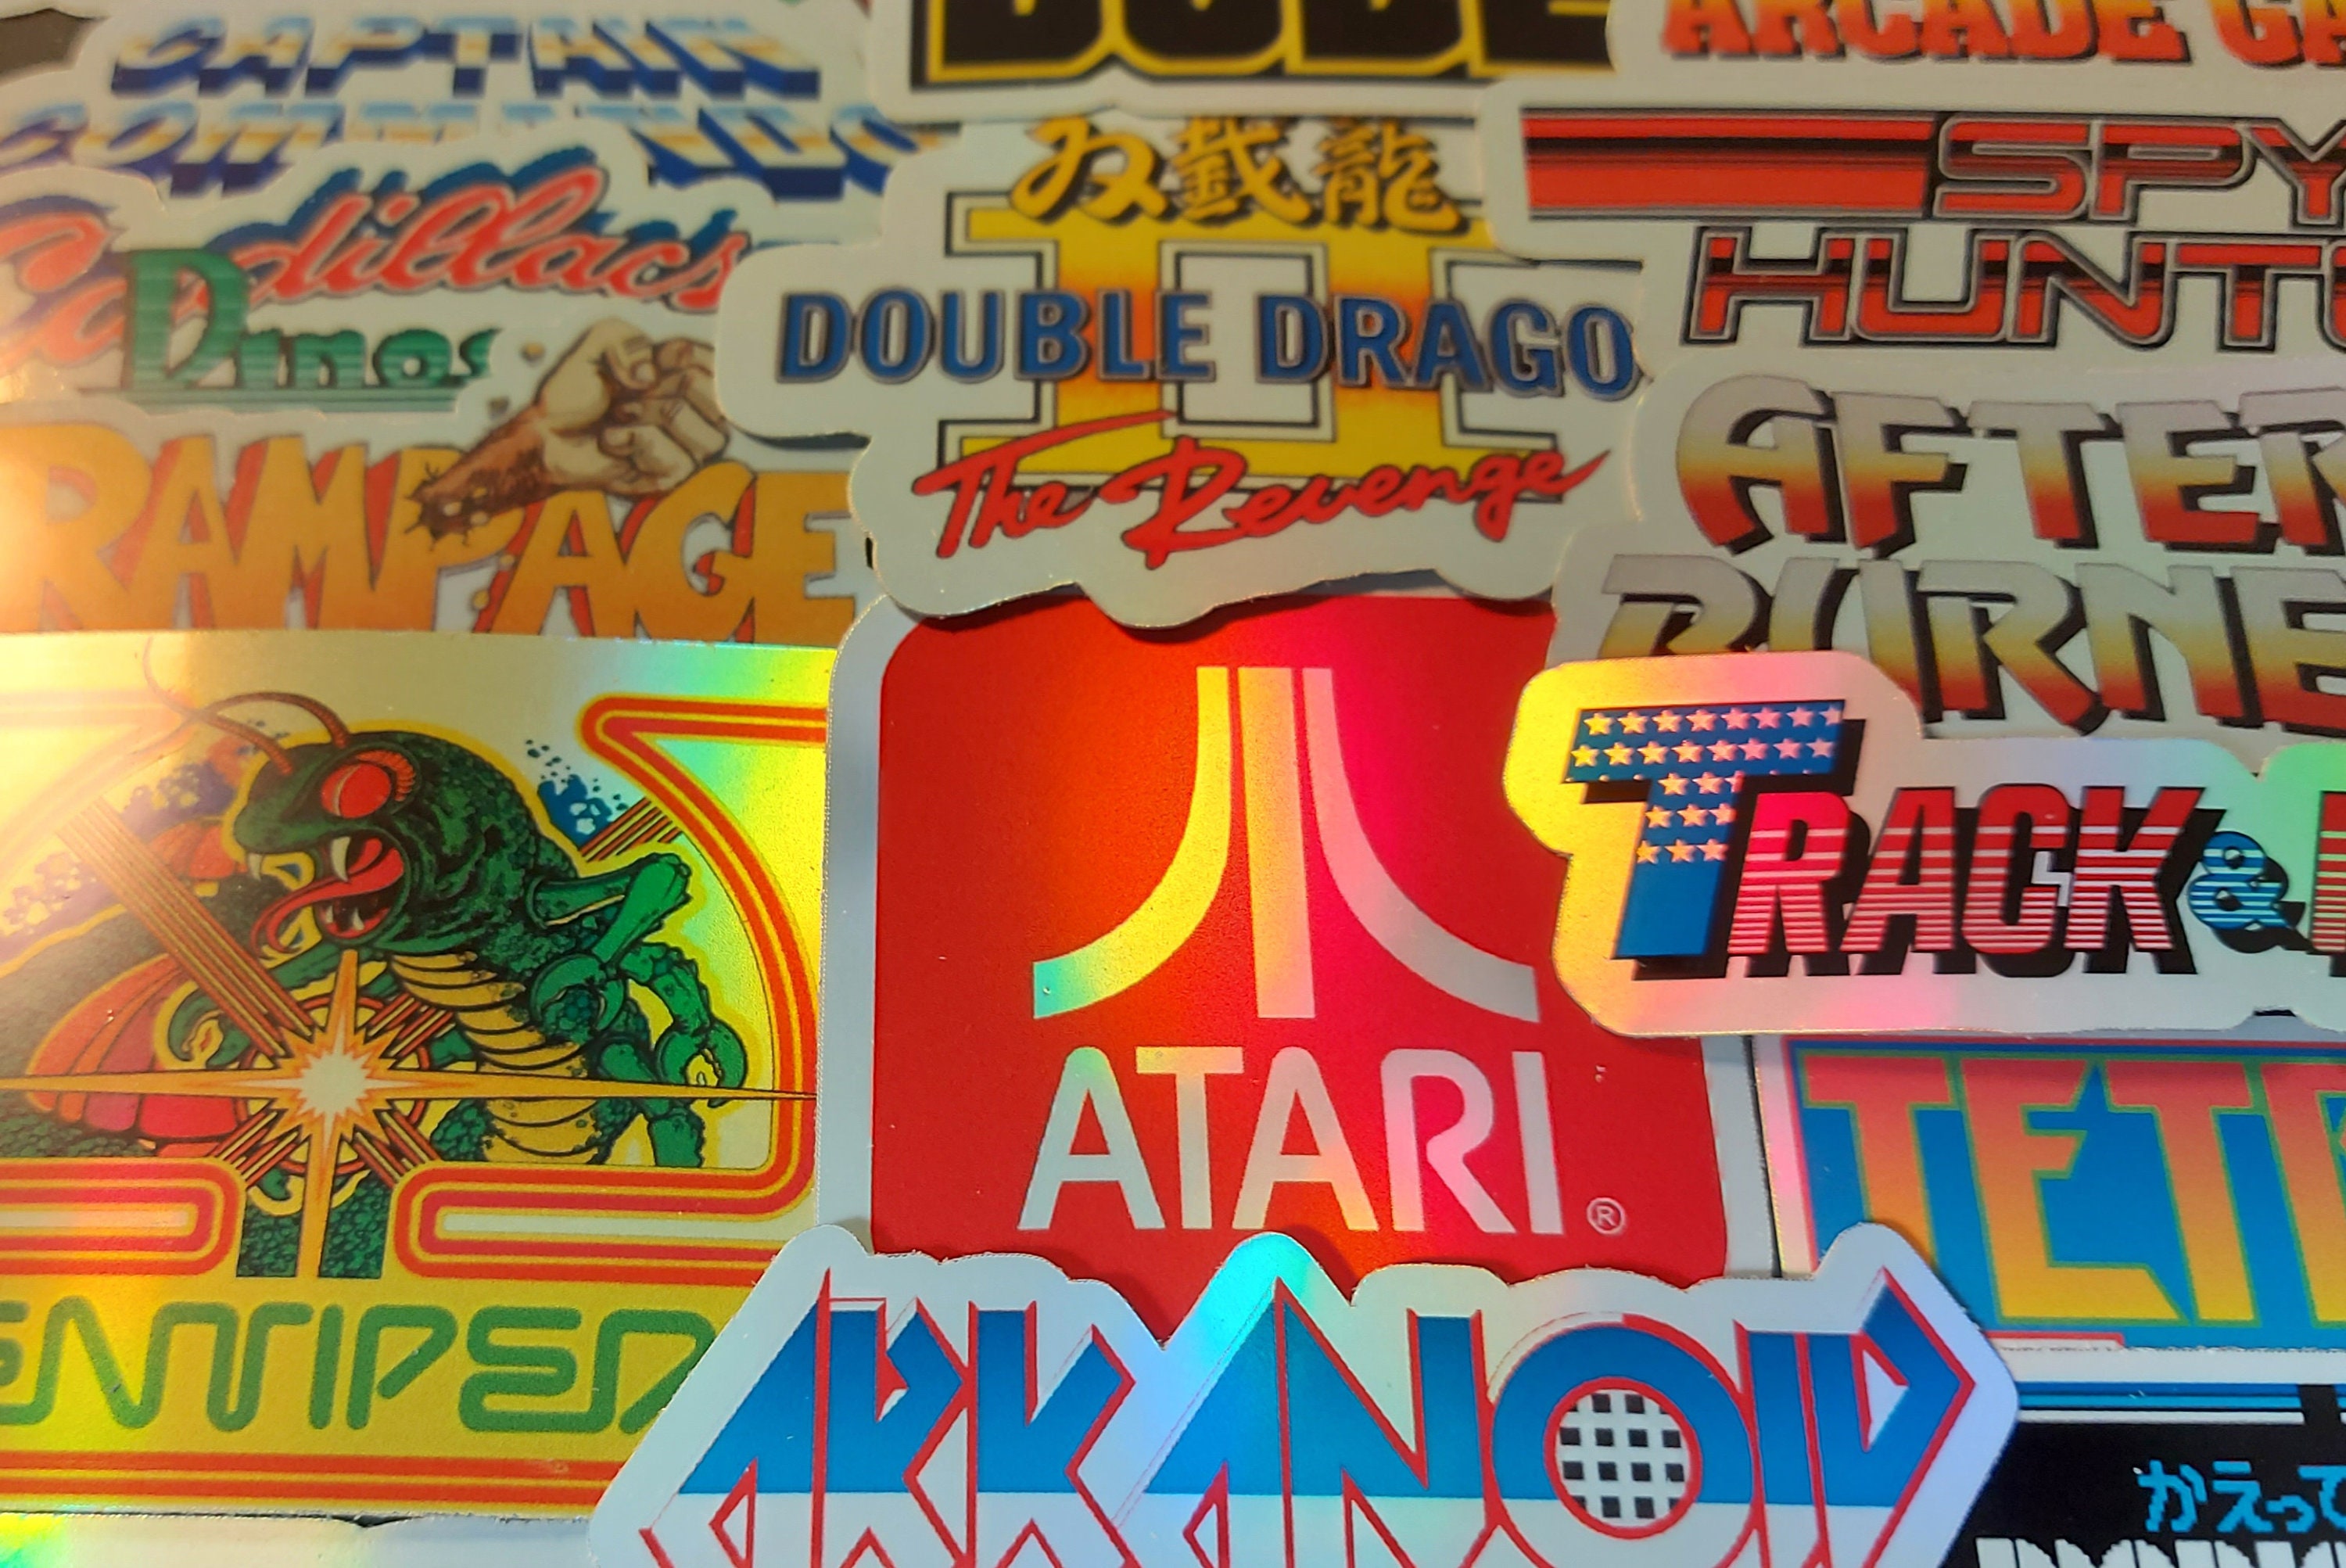 42,746 Retro Gaming Stickers Images, Stock Photos, 3D objects